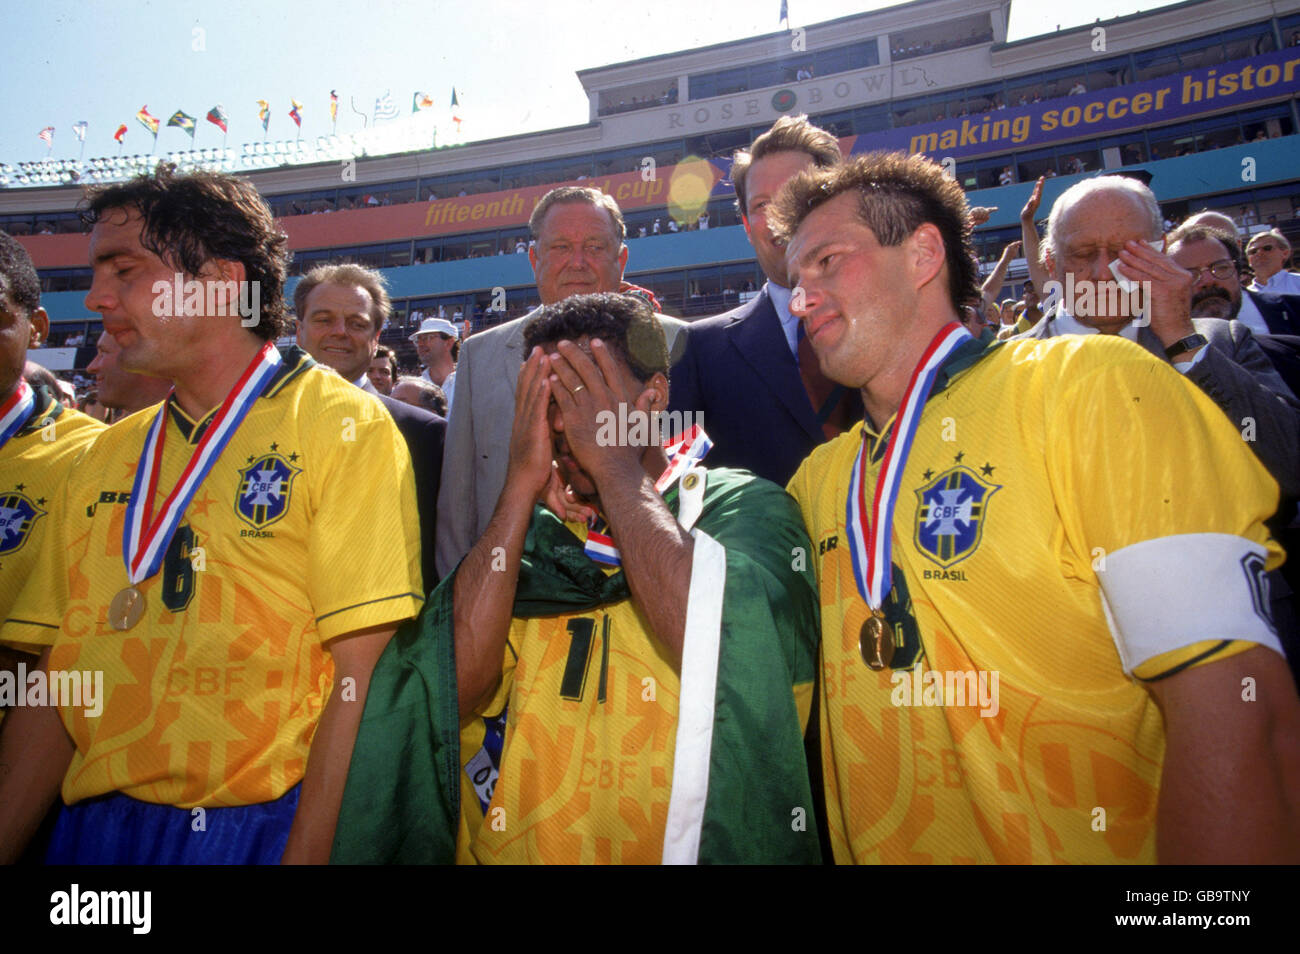 1994 fifa world cup Stock Photos and Images